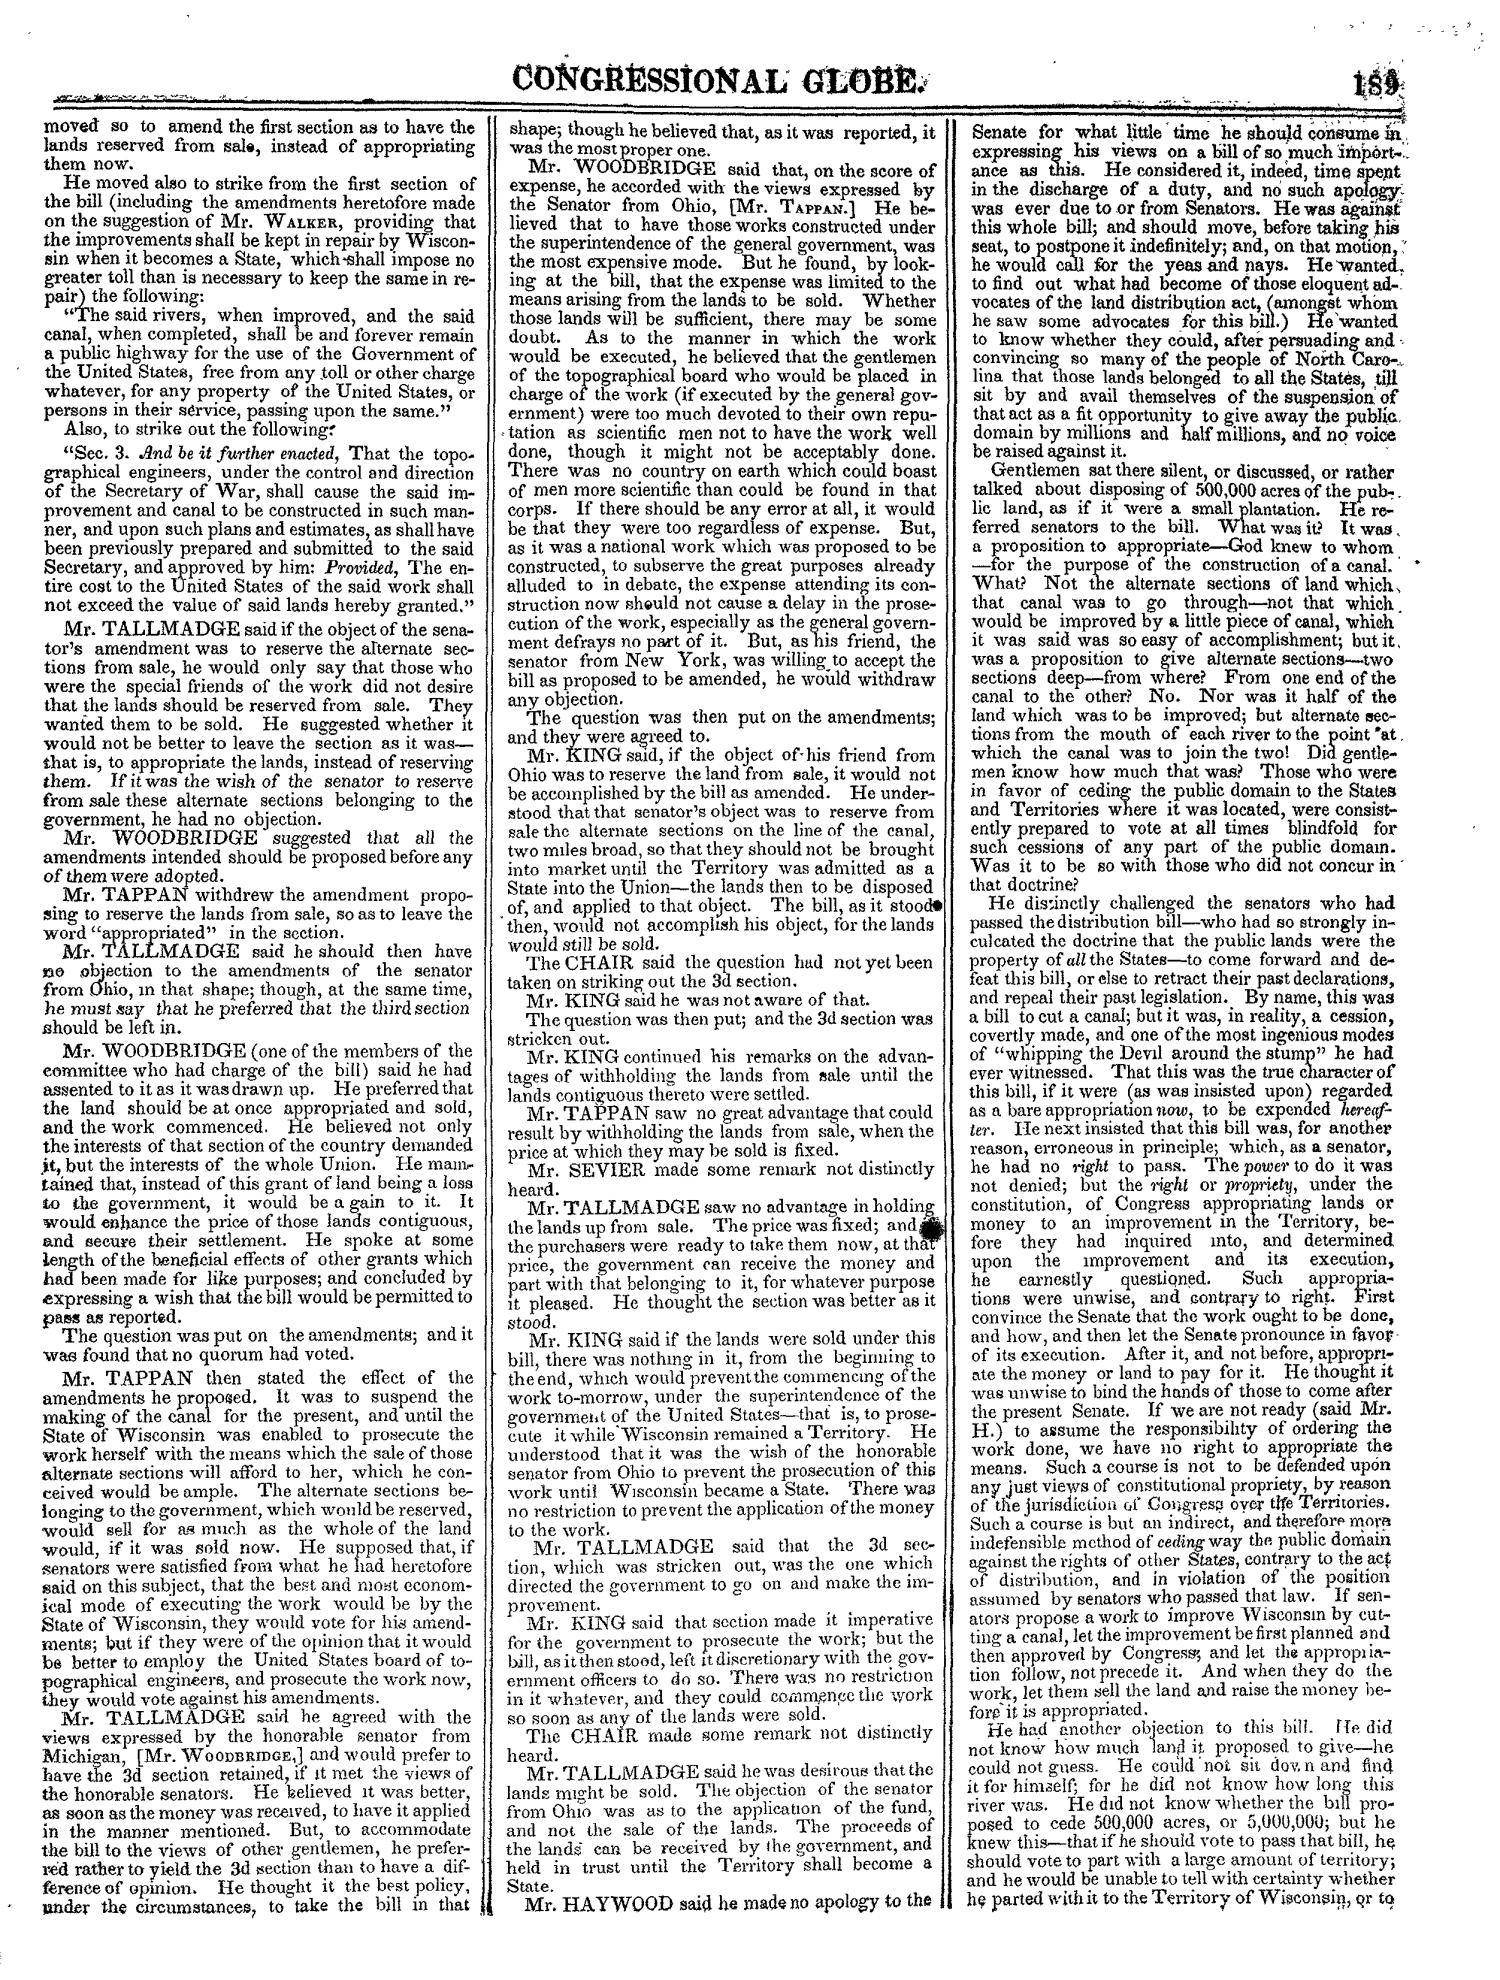 The Congressional Globe, Volume 13, Part 1: Twenty-Eighth Congress, First Session
                                                
                                                    189
                                                